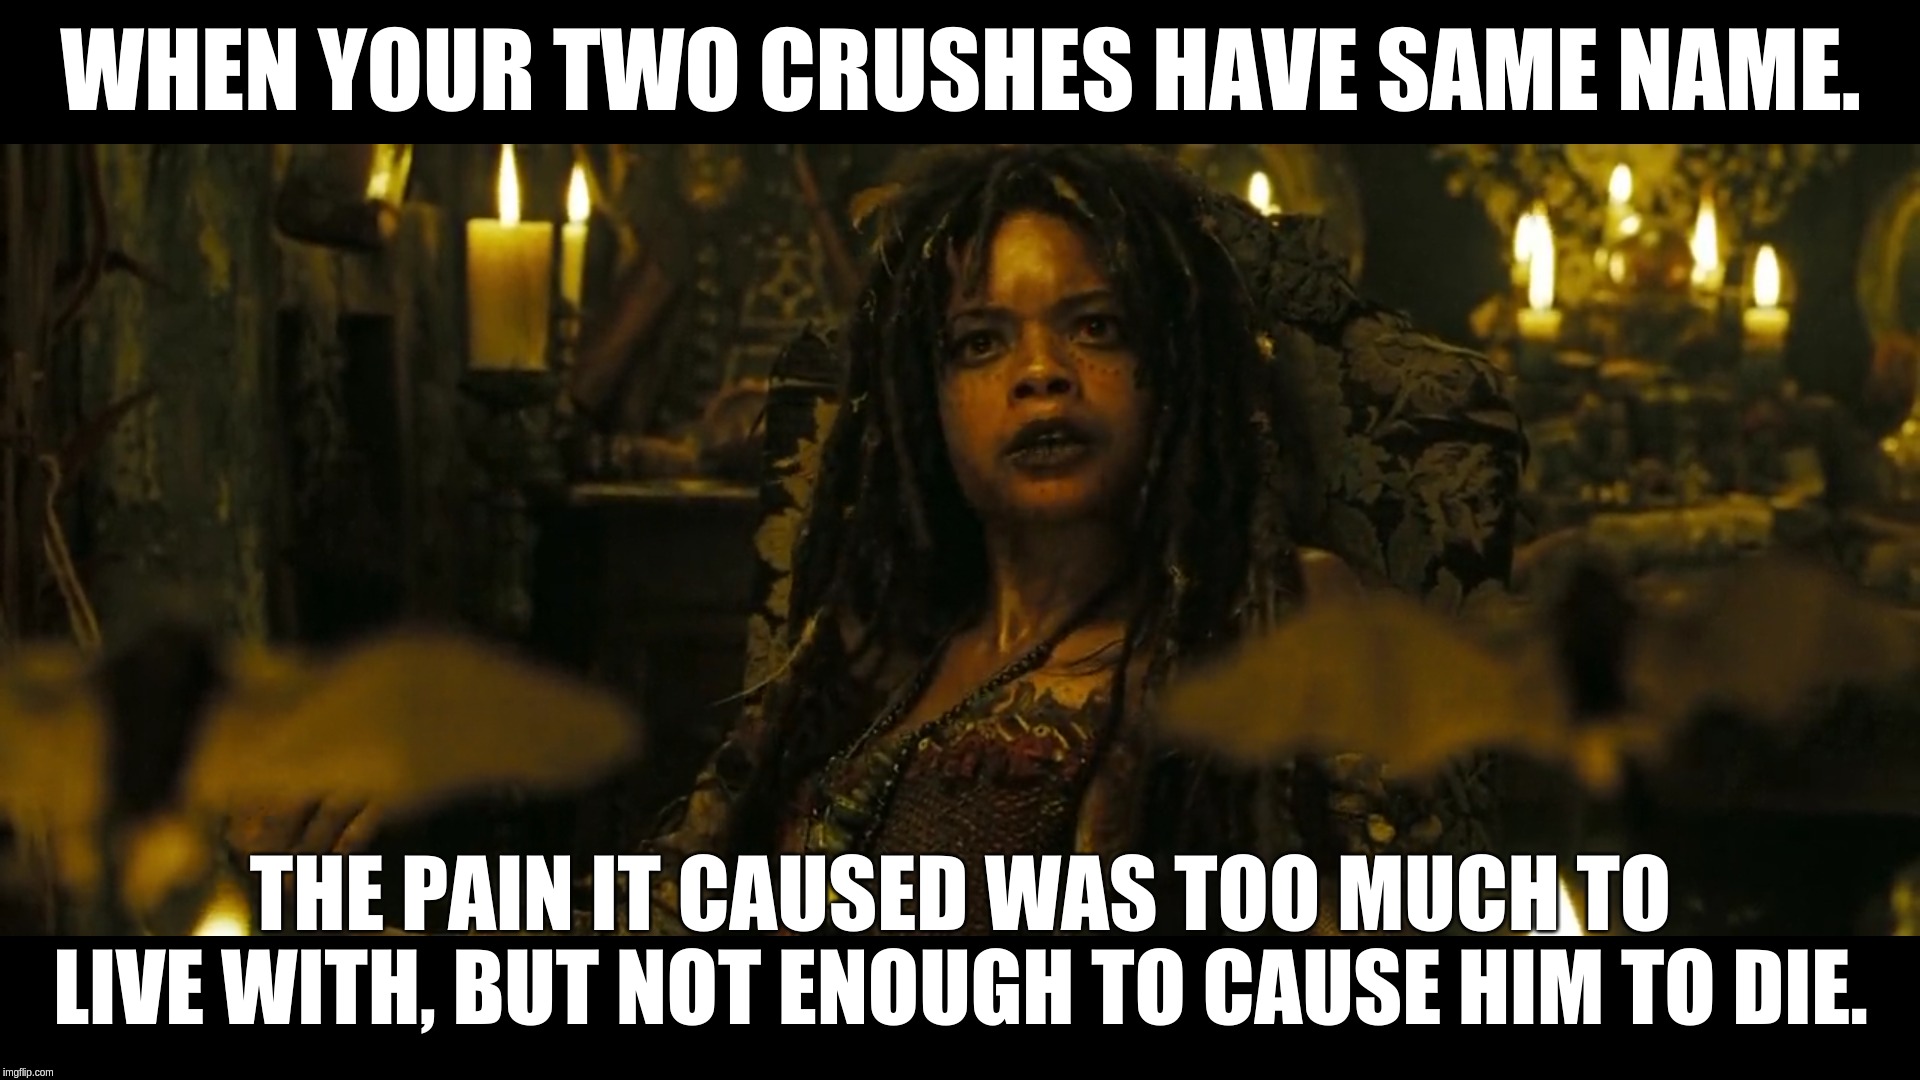 WHEN YOUR TWO CRUSHES HAVE SAME NAME. THE PAIN IT CAUSED WAS TOO MUCH TO LIVE WITH, BUT NOT ENOUGH TO CAUSE HIM TO DIE. | image tagged in pirates of the carribean,single life | made w/ Imgflip meme maker